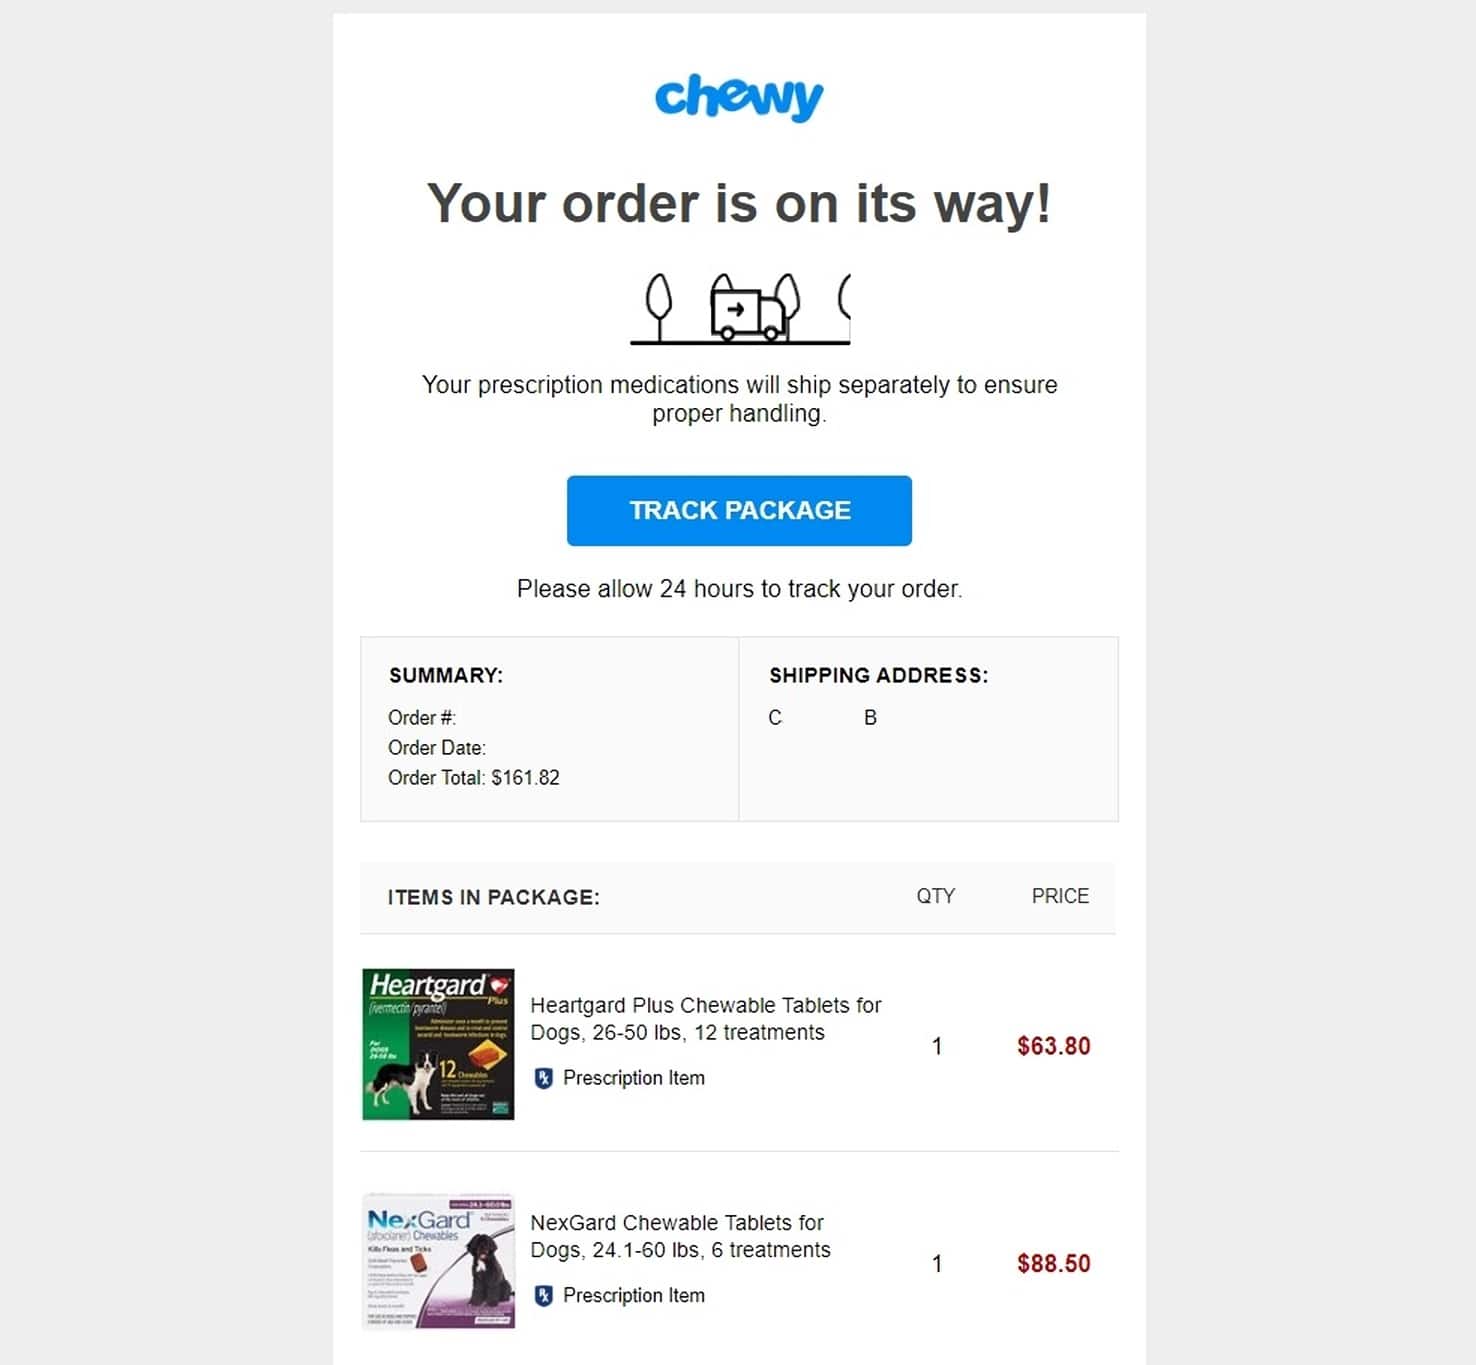 Chewy transactional email